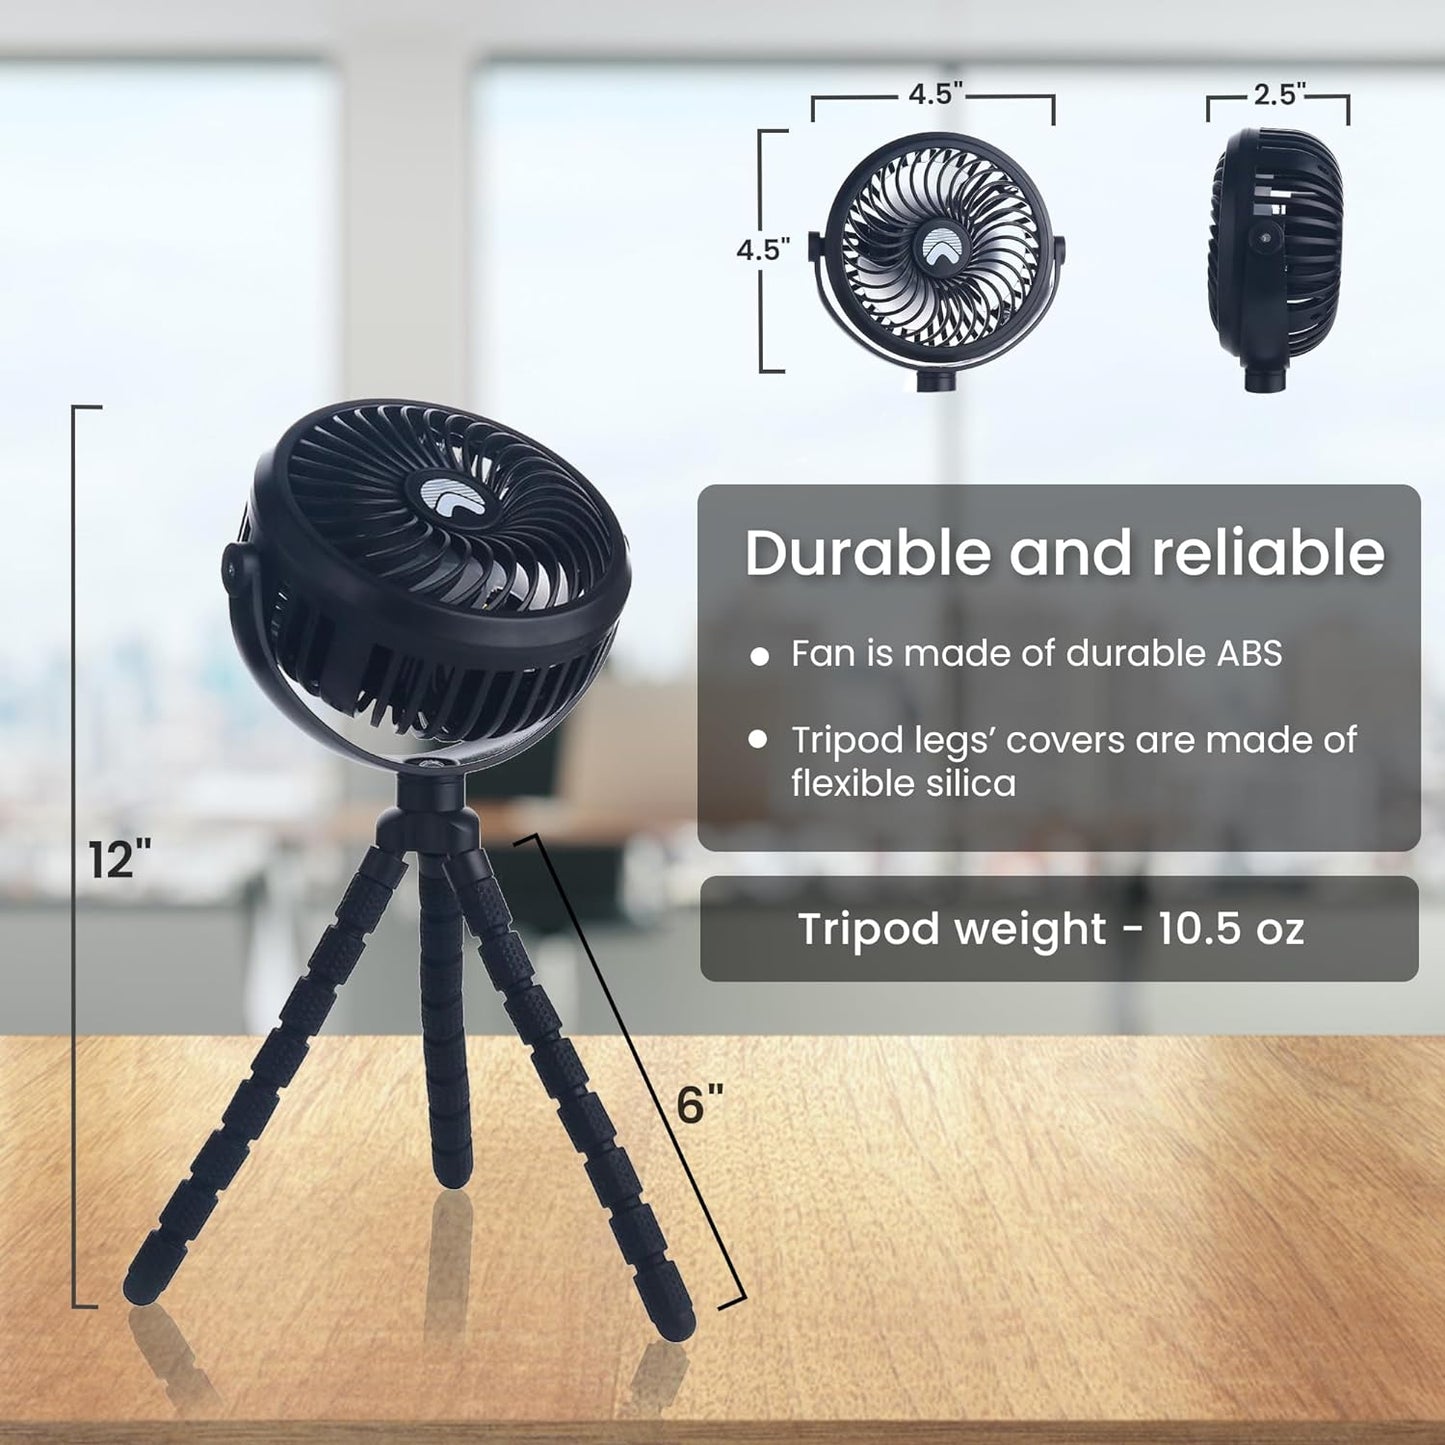 AYL Portable Fan Rechargeable Battery Operated, Small Stroller Fan with Lights, Clip On Fan, Handheld Cooling Mini Fan for Travel, Car Seat, Camping, Bedroom (Black)